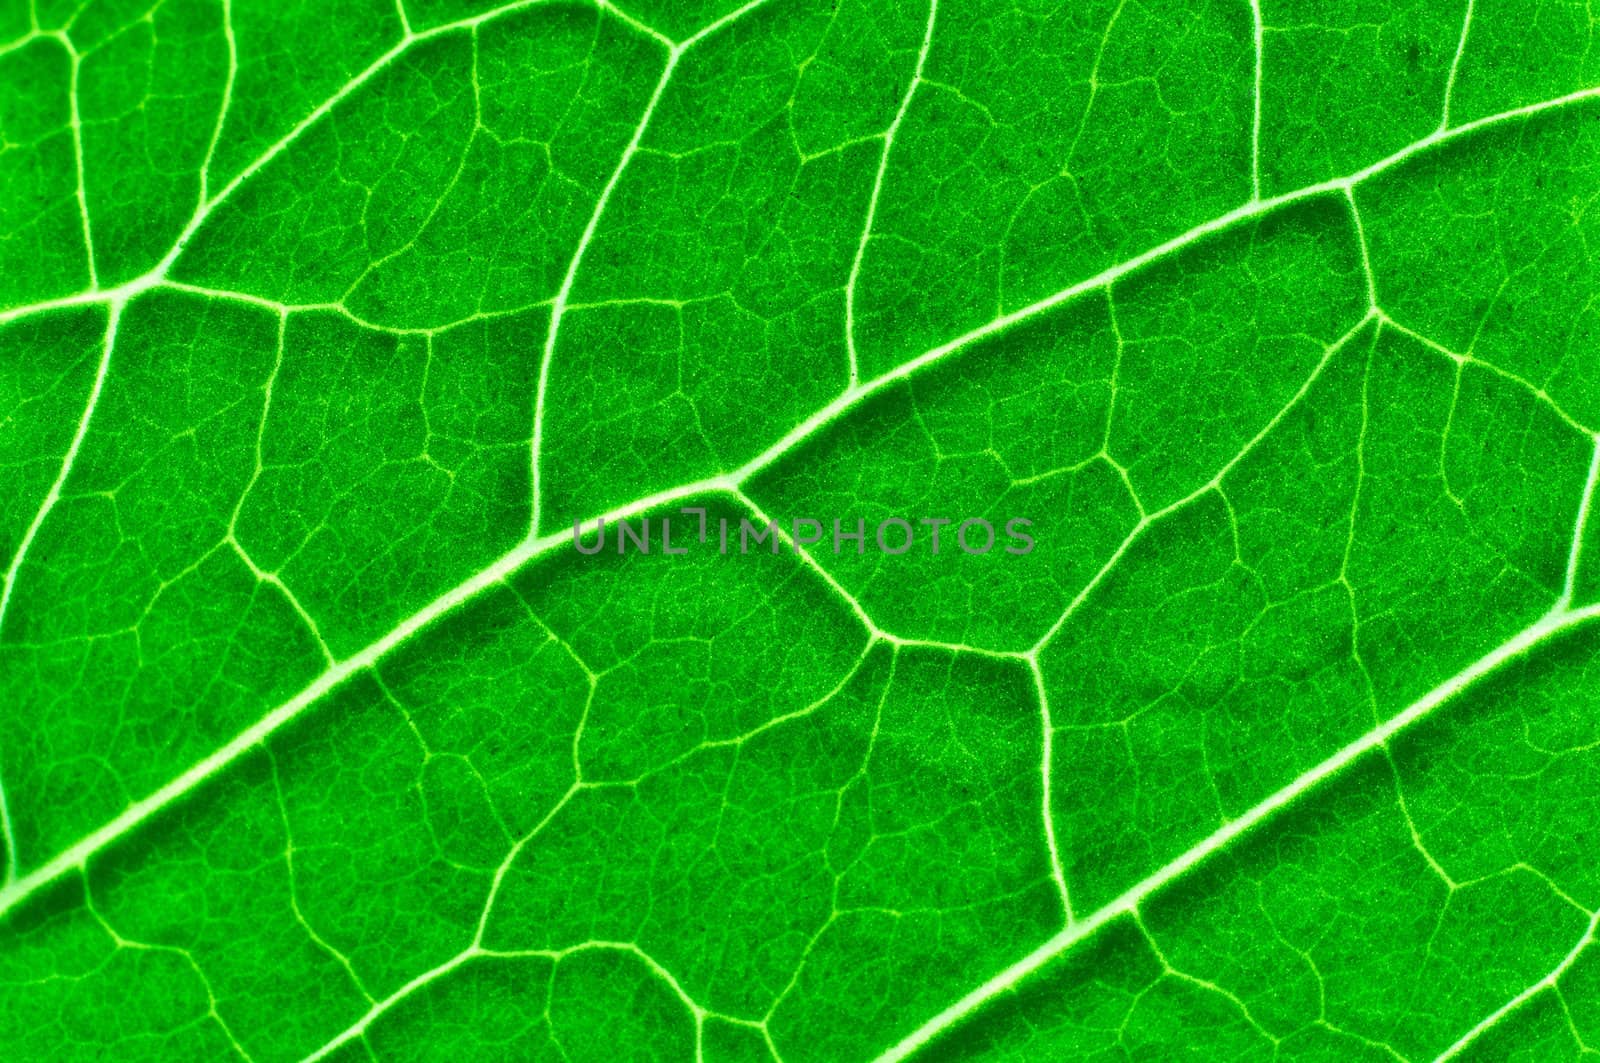 Vibrant green texture of a leaf